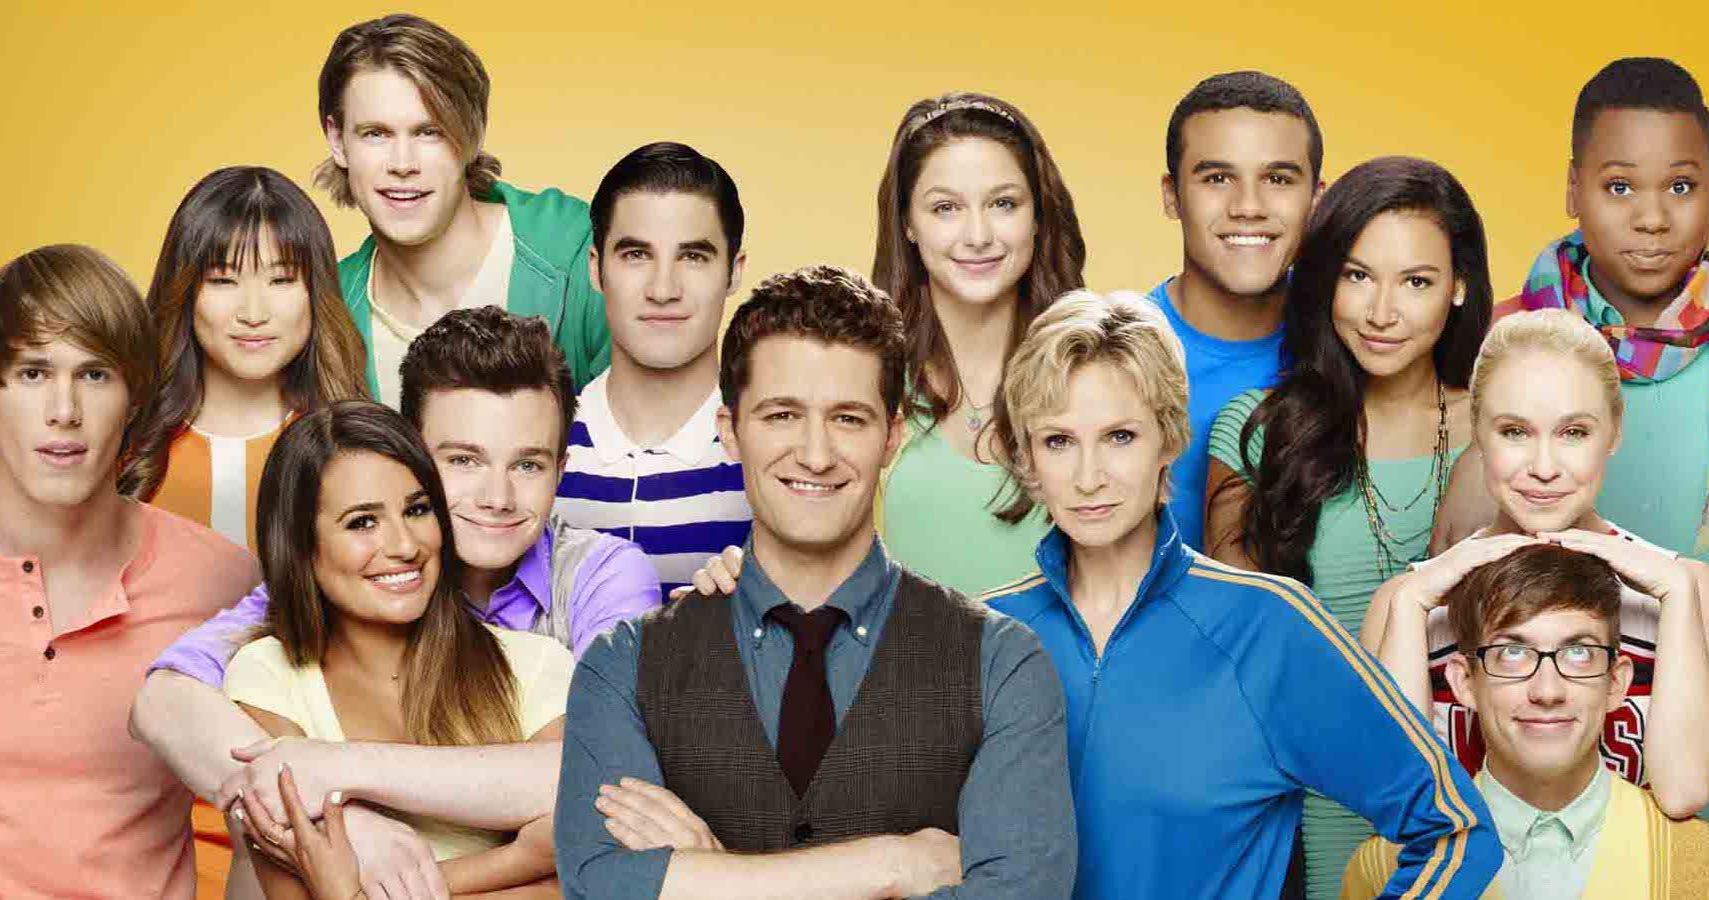 Glee Revival Is Still Very Possible at Fox